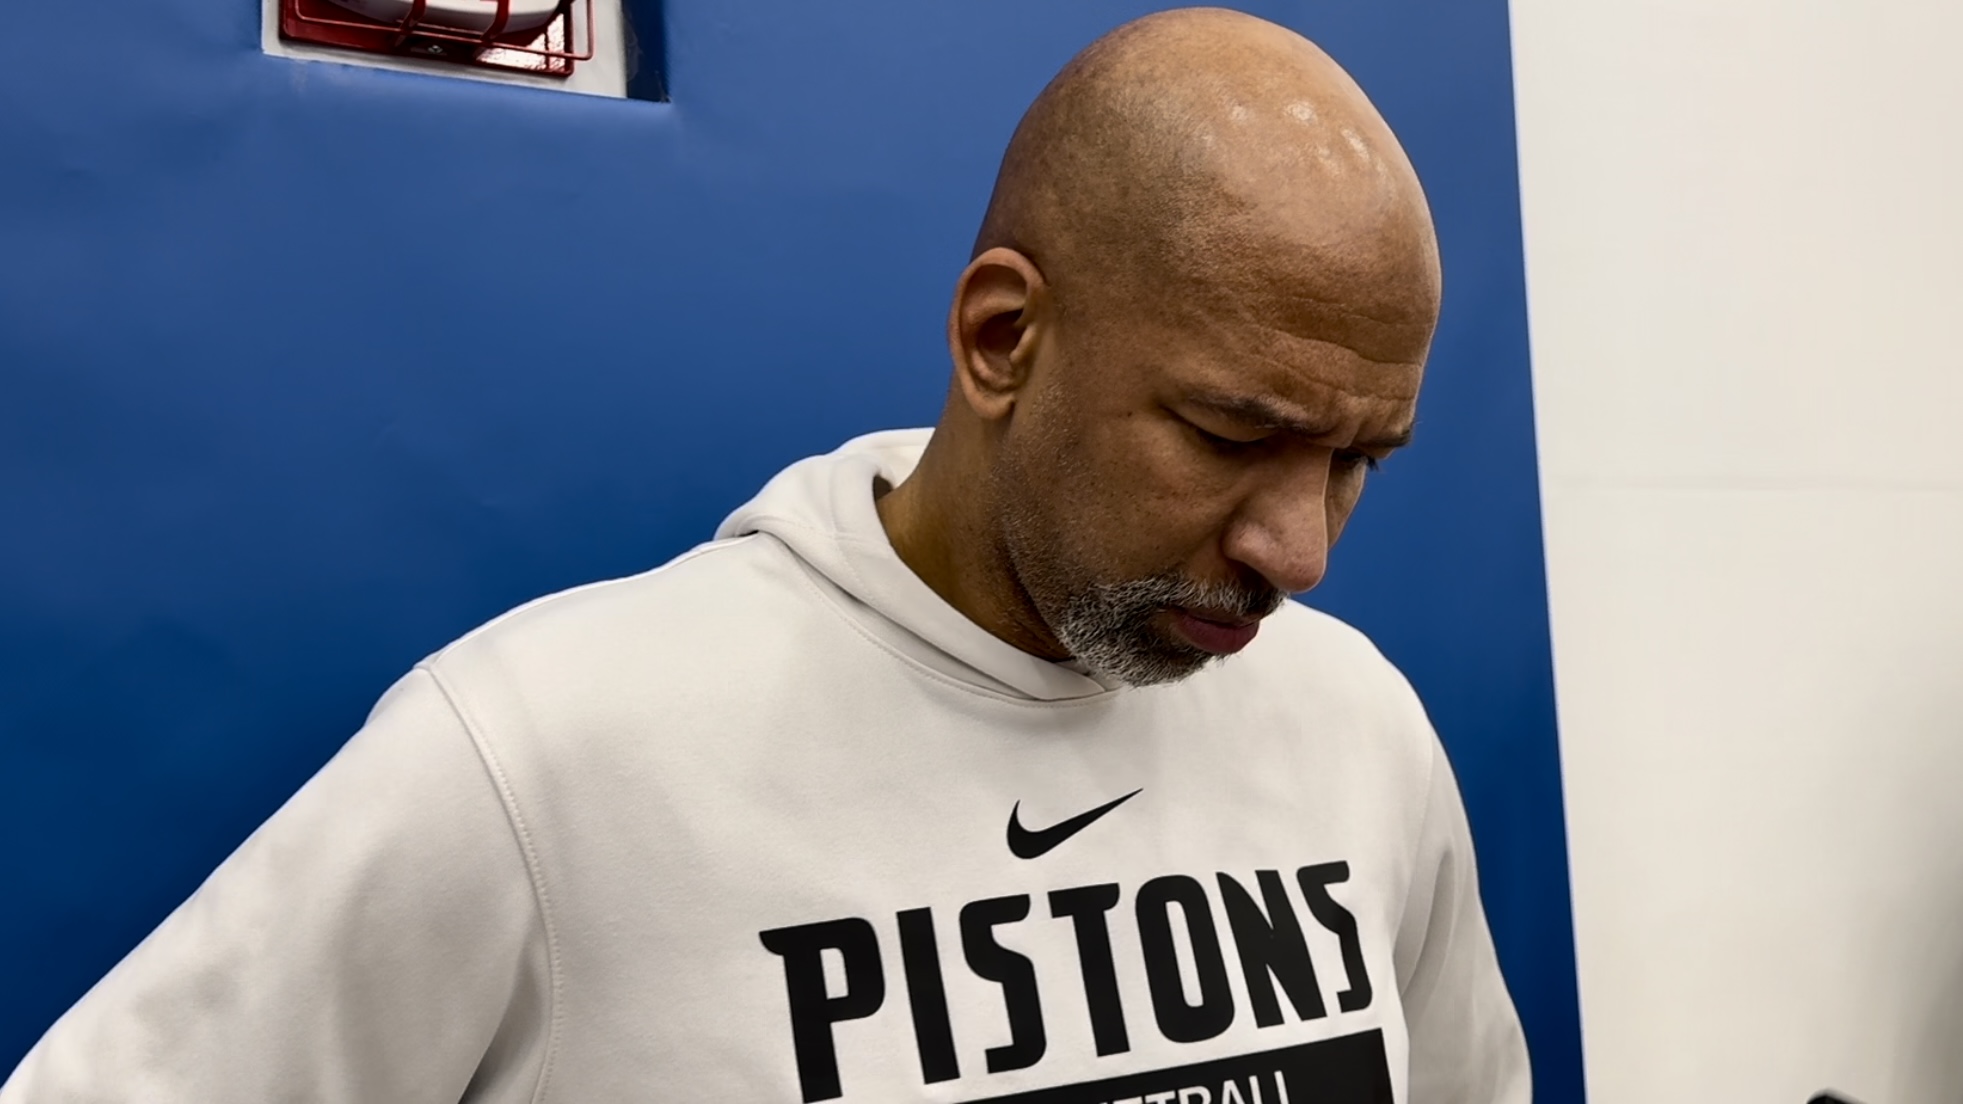 Detroit Pistons head coach Monty Williams speaks on the struggles, frustrations and plan to turn things around this season. Article by Brandon Dent. Photo Credit: Brandon Dent.